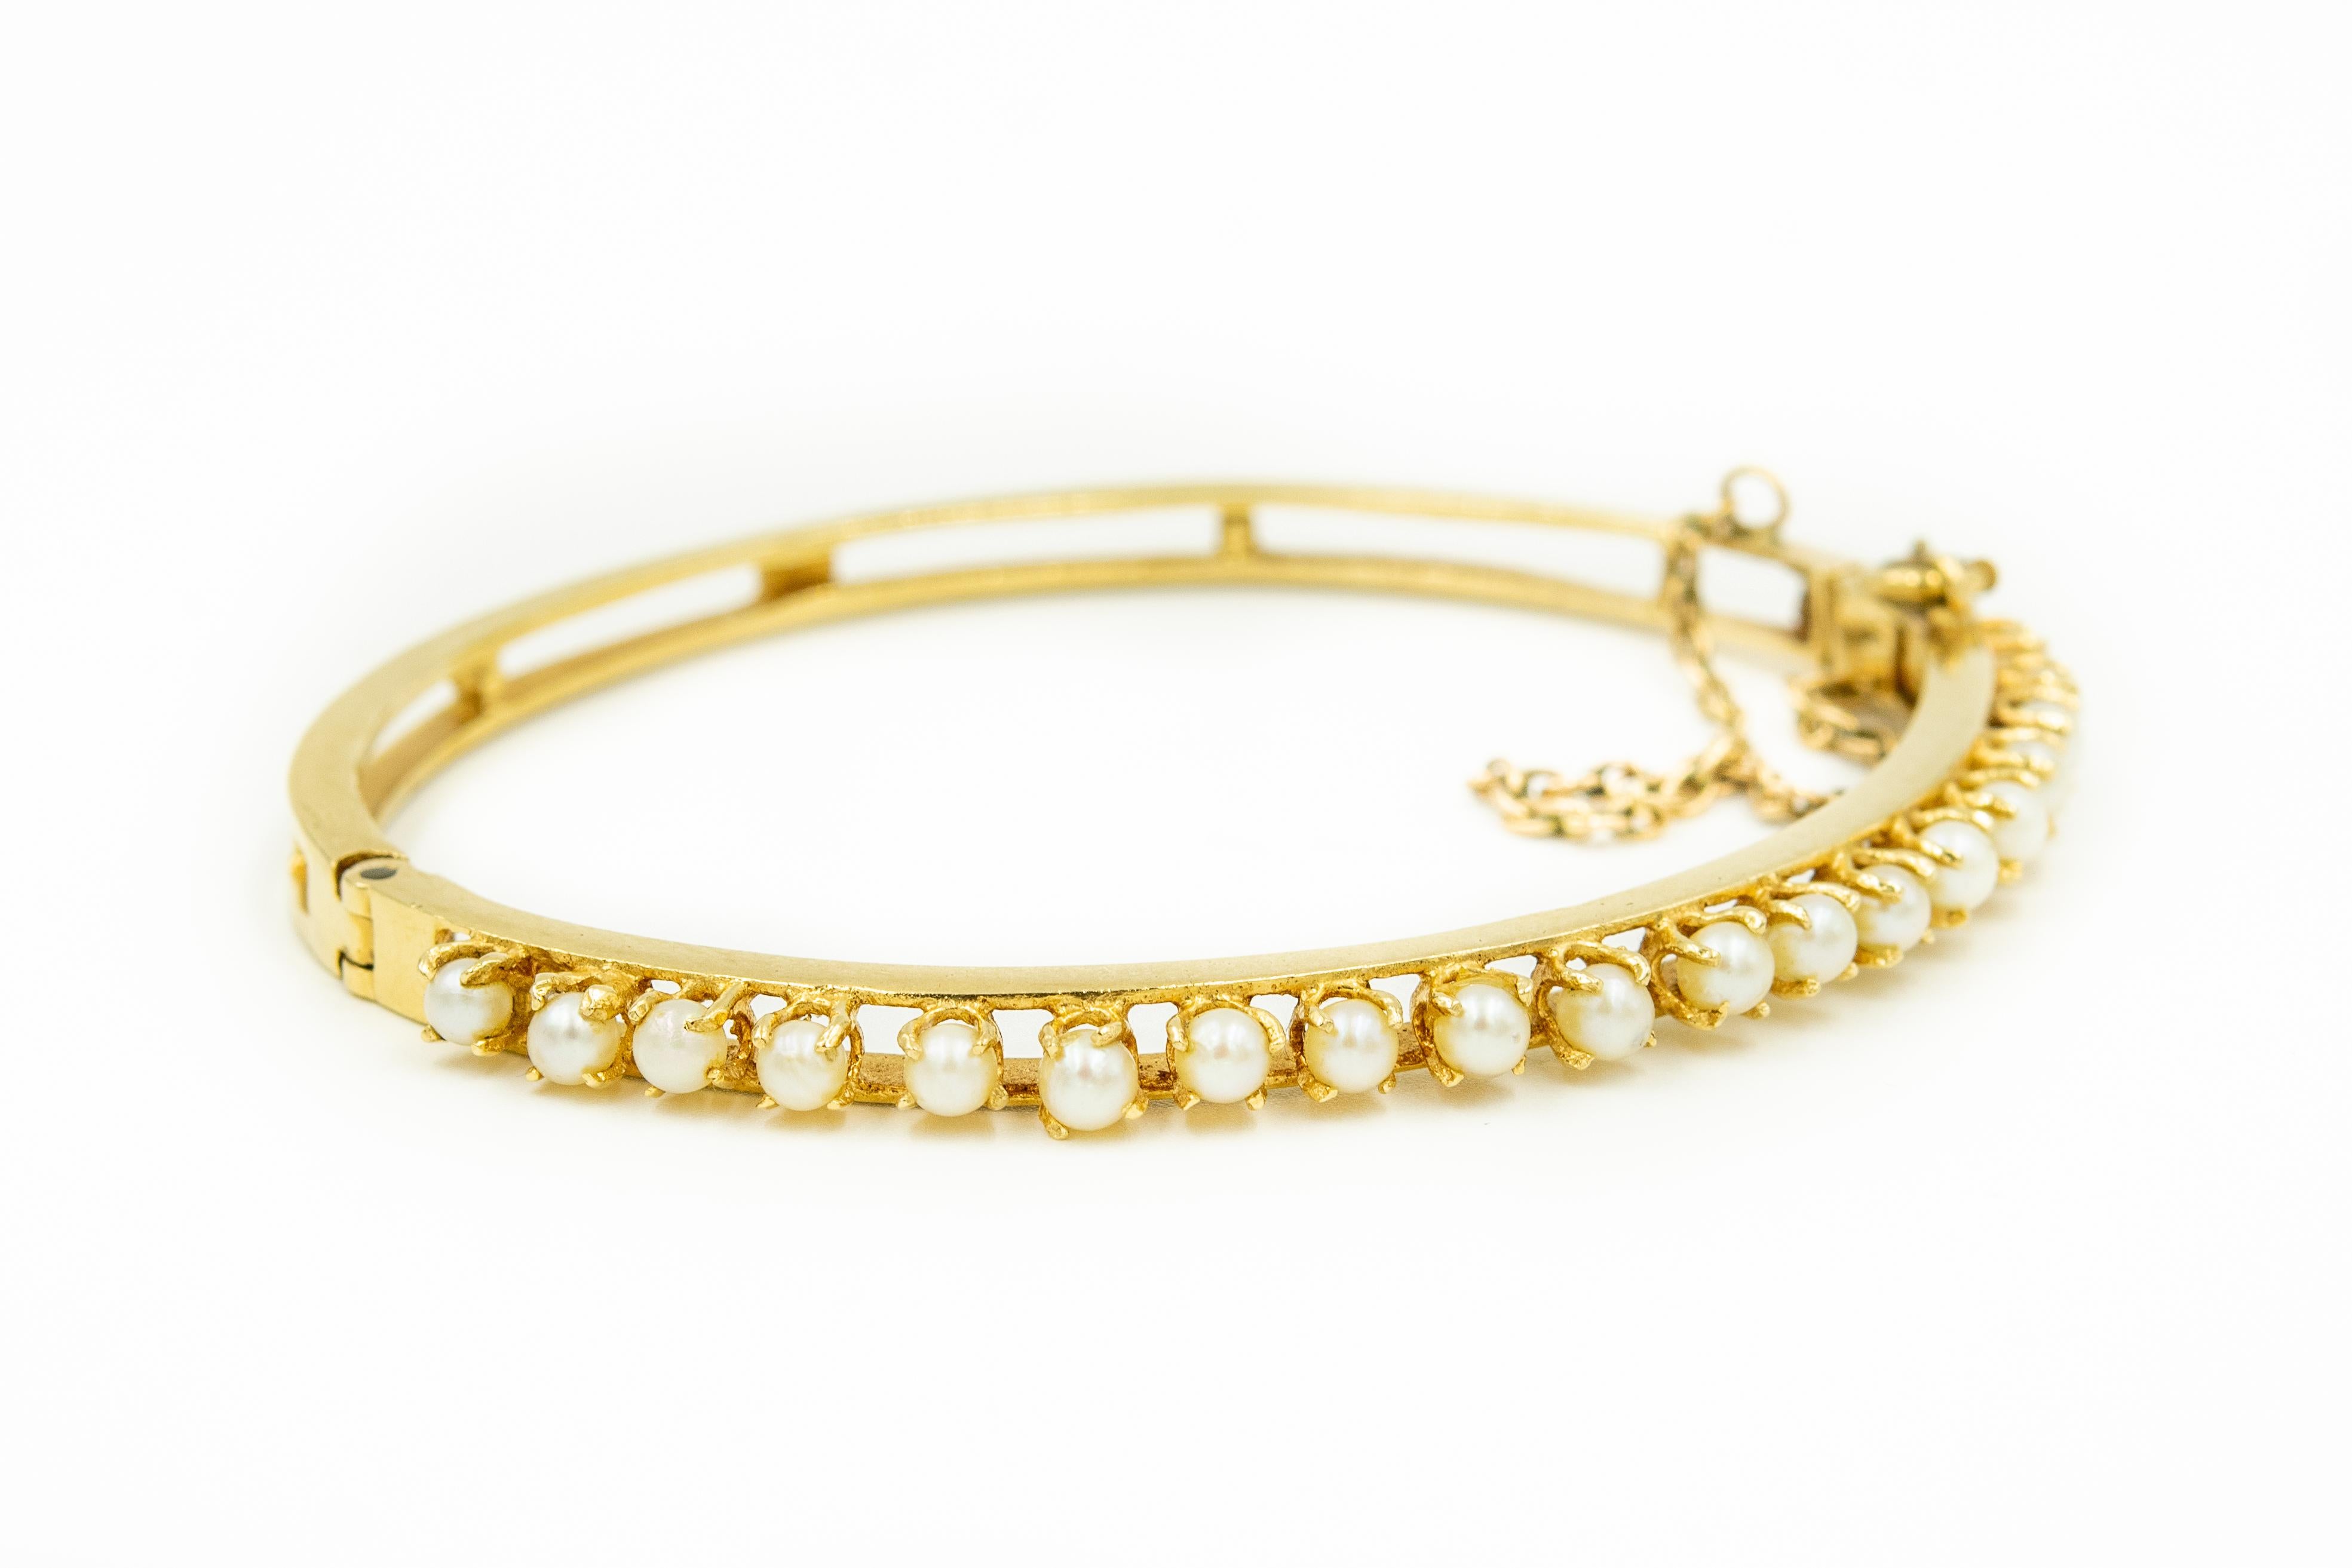 Classic 1950s elegant cultured pearl bangle featuring 19 prong set cultured pearls (approximately 3.3 mm each) set in a 14k yellow gold bangle with a simple shiny finish the sides.  The back is open.  The bracelet hinges open and closes with a push